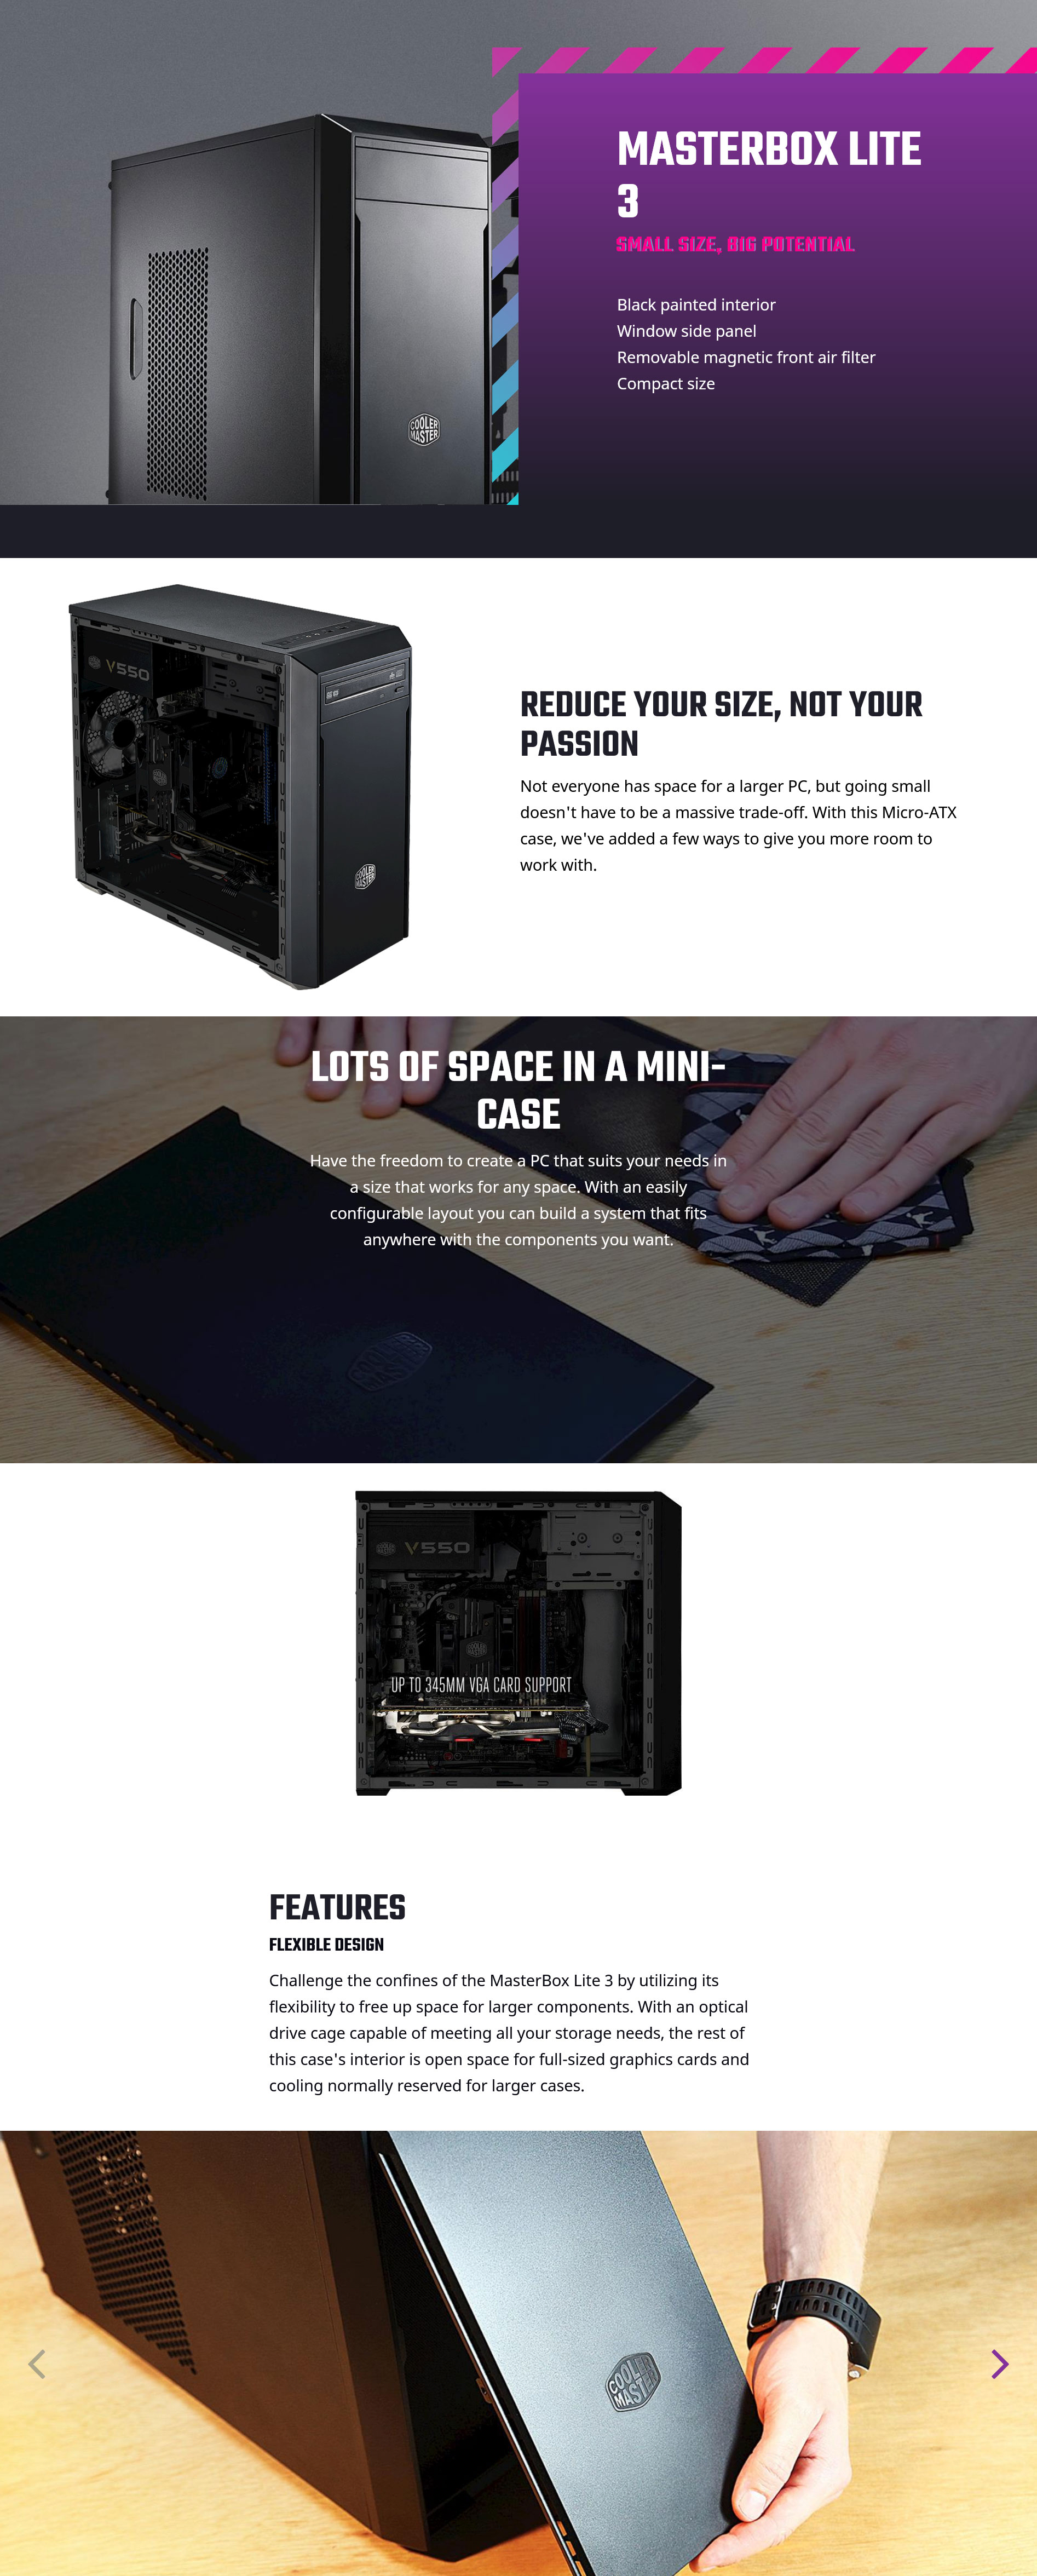 Cooler Master MasterBox Lite 3 Case with Side Windows MCW-L3S2-KW5N Details